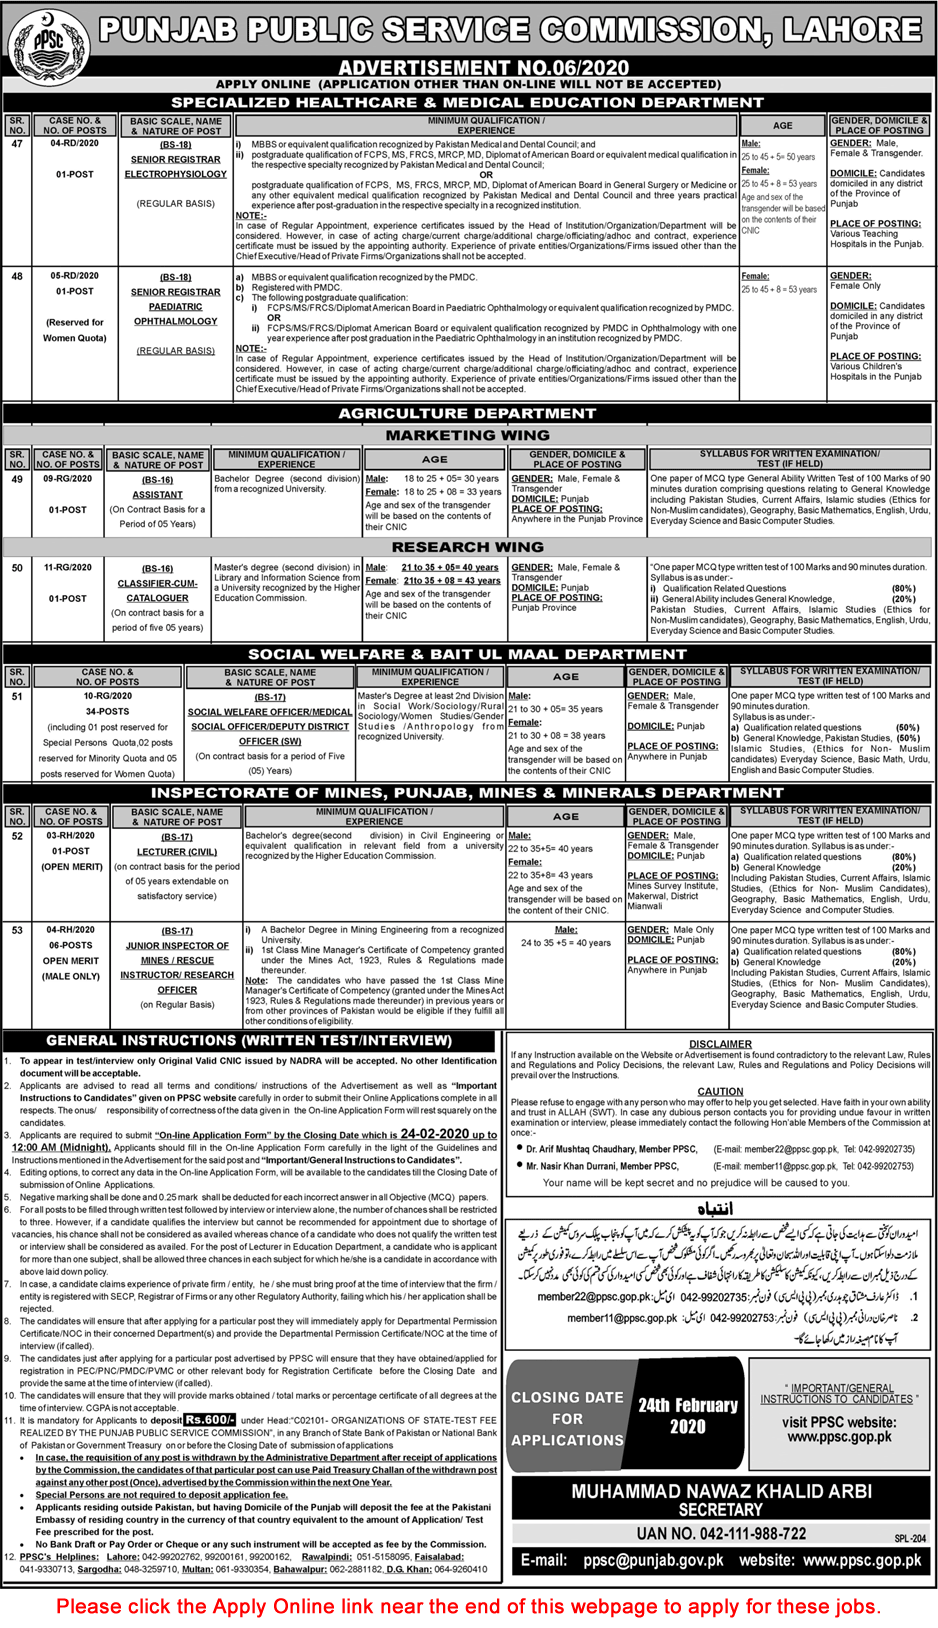 PPSC Jobs February 2020 Apply Online Consolidated Advertisement No 06/2020 6/2020 Latest